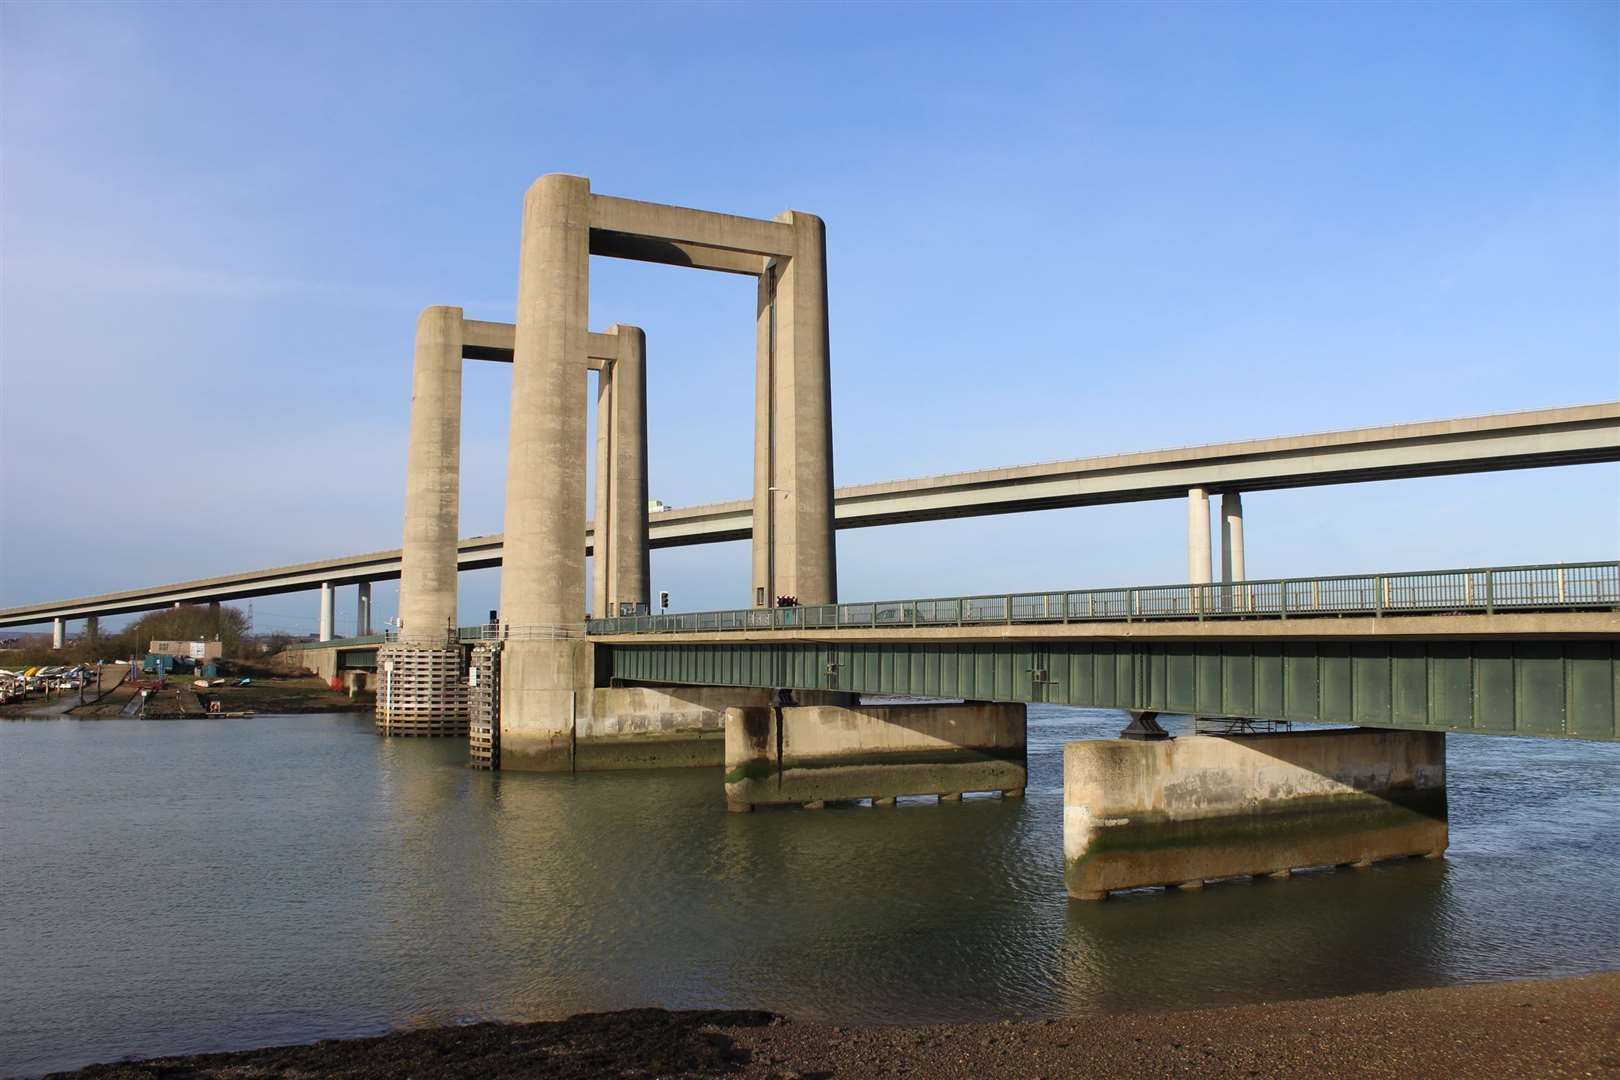 The Sheppey Crossing and Kingsferry Bridge